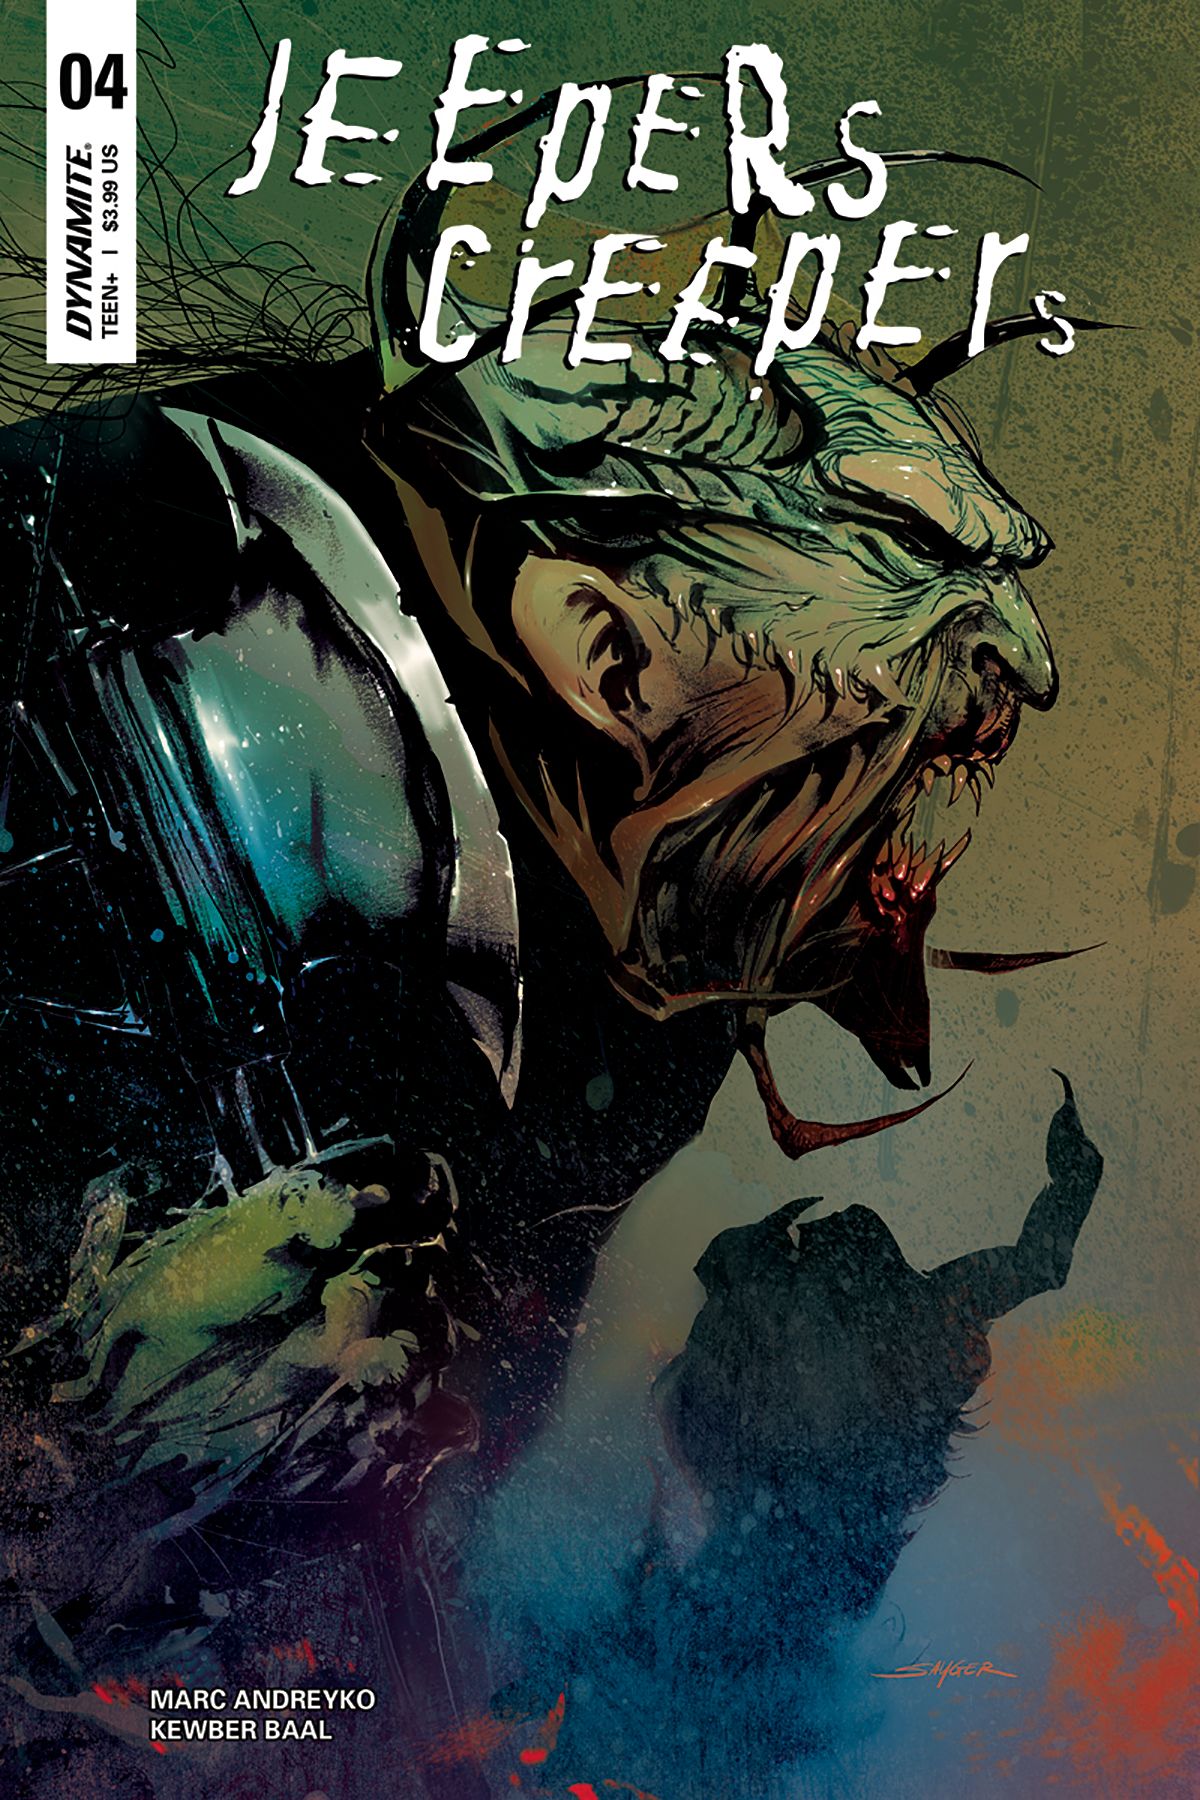 Jeepers Creepers #4 Comic